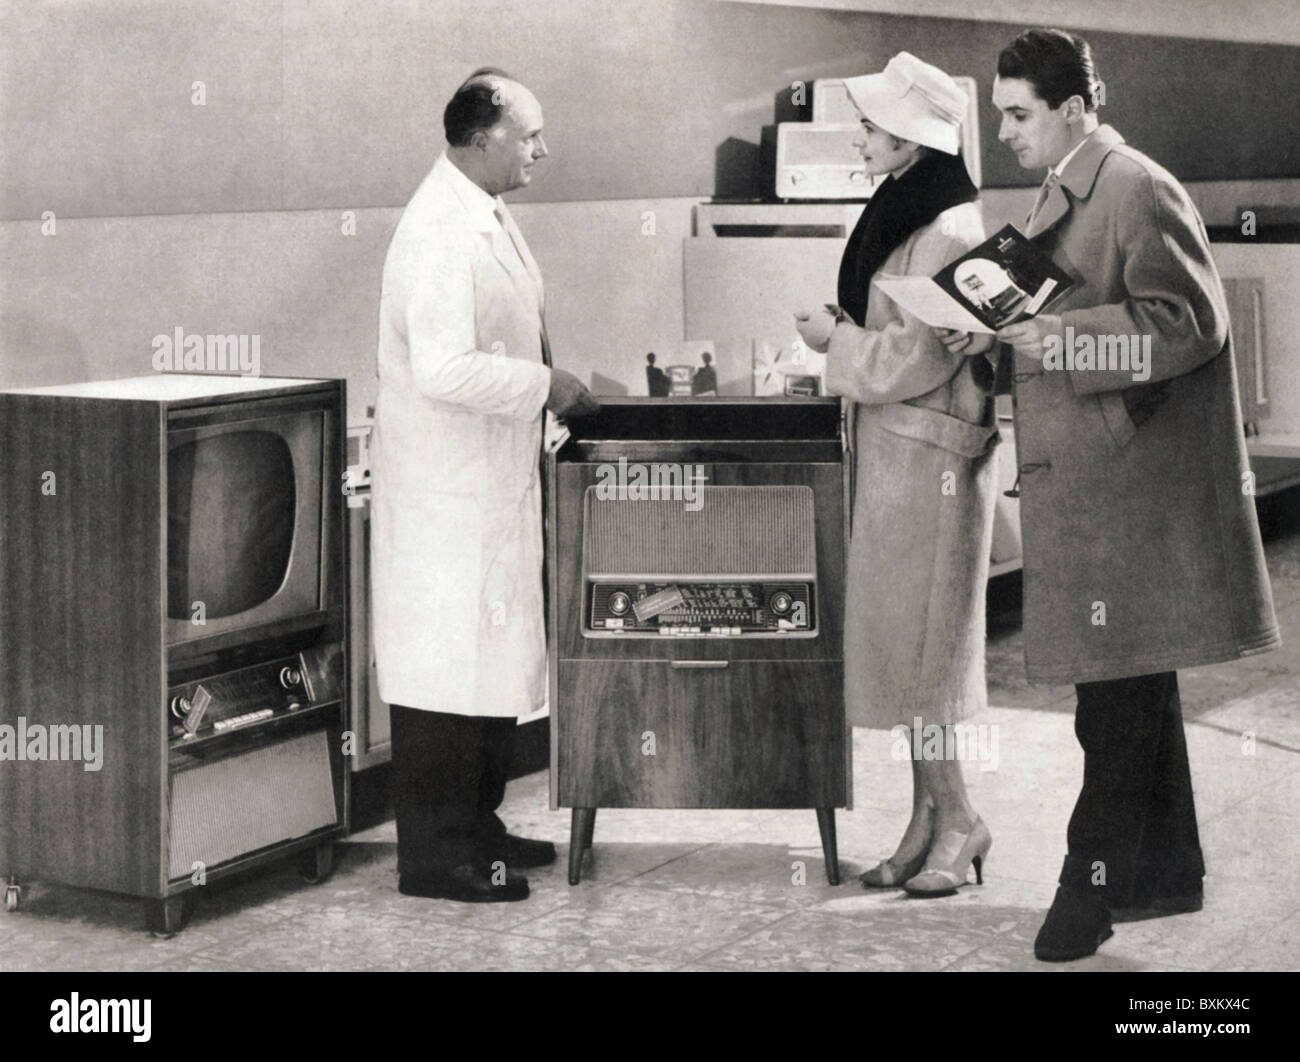 broadcast,radio,radio and television shop,sale of a music chest,Germany,1957,1950s,50s,20th century,historic,historical,specialized shop assistant,specialized shop assistants,sales talk,married couple gets information abour Siemens Musiktruhe TR 1,TR1,with integrated radio set and record player,television set,TV set,TV,television sets,TV sets,TVs,retail,retail trade,retailing,retail and wholesale,retail,specialized dealer,economic miracle,economic miracles,home electronics,consumer electronics,entertainment electronics,home ent,Additional-Rights-Clearences-Not Available Stock Photo